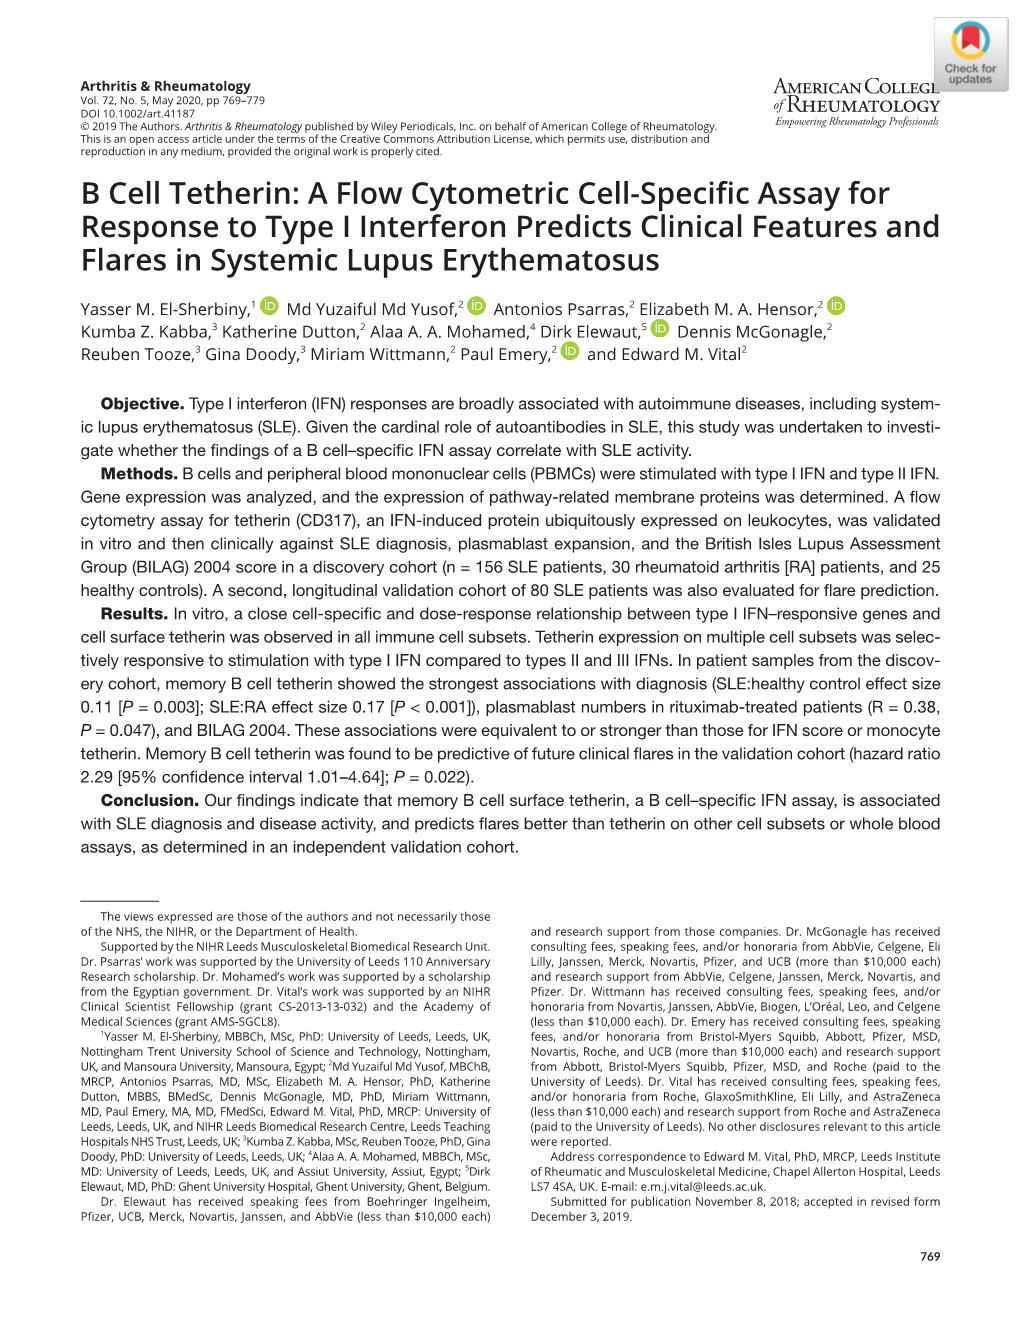 B Cell Tetherin: a Flow Cytometric Cell‐Specific Assay for Response